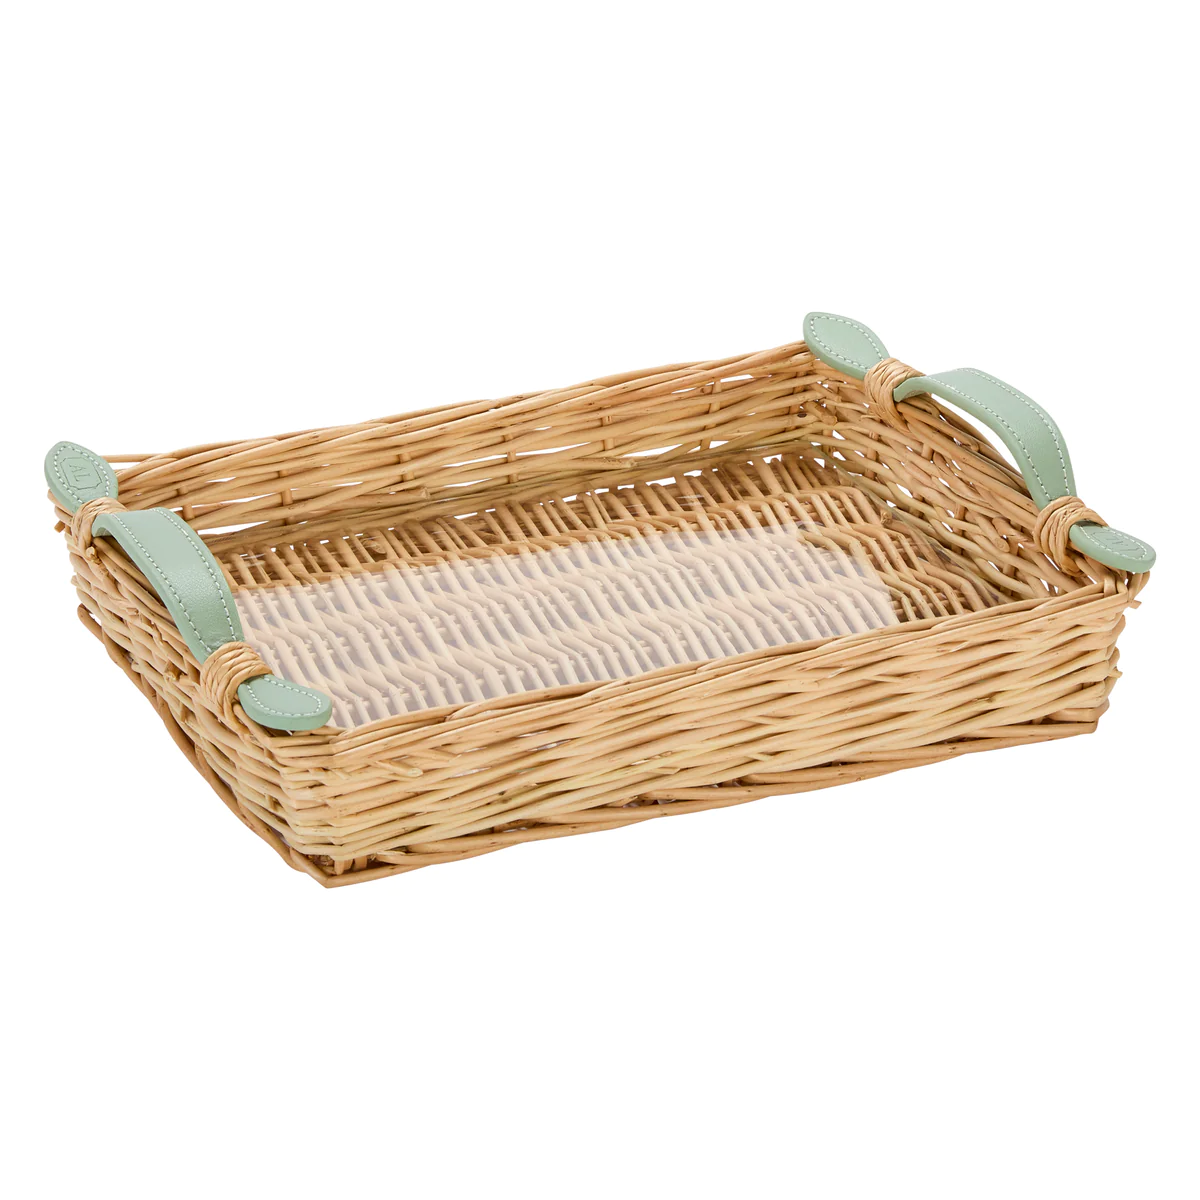 Coffee Table Tray Basket Weaving Kit and Basic Instructions Basket